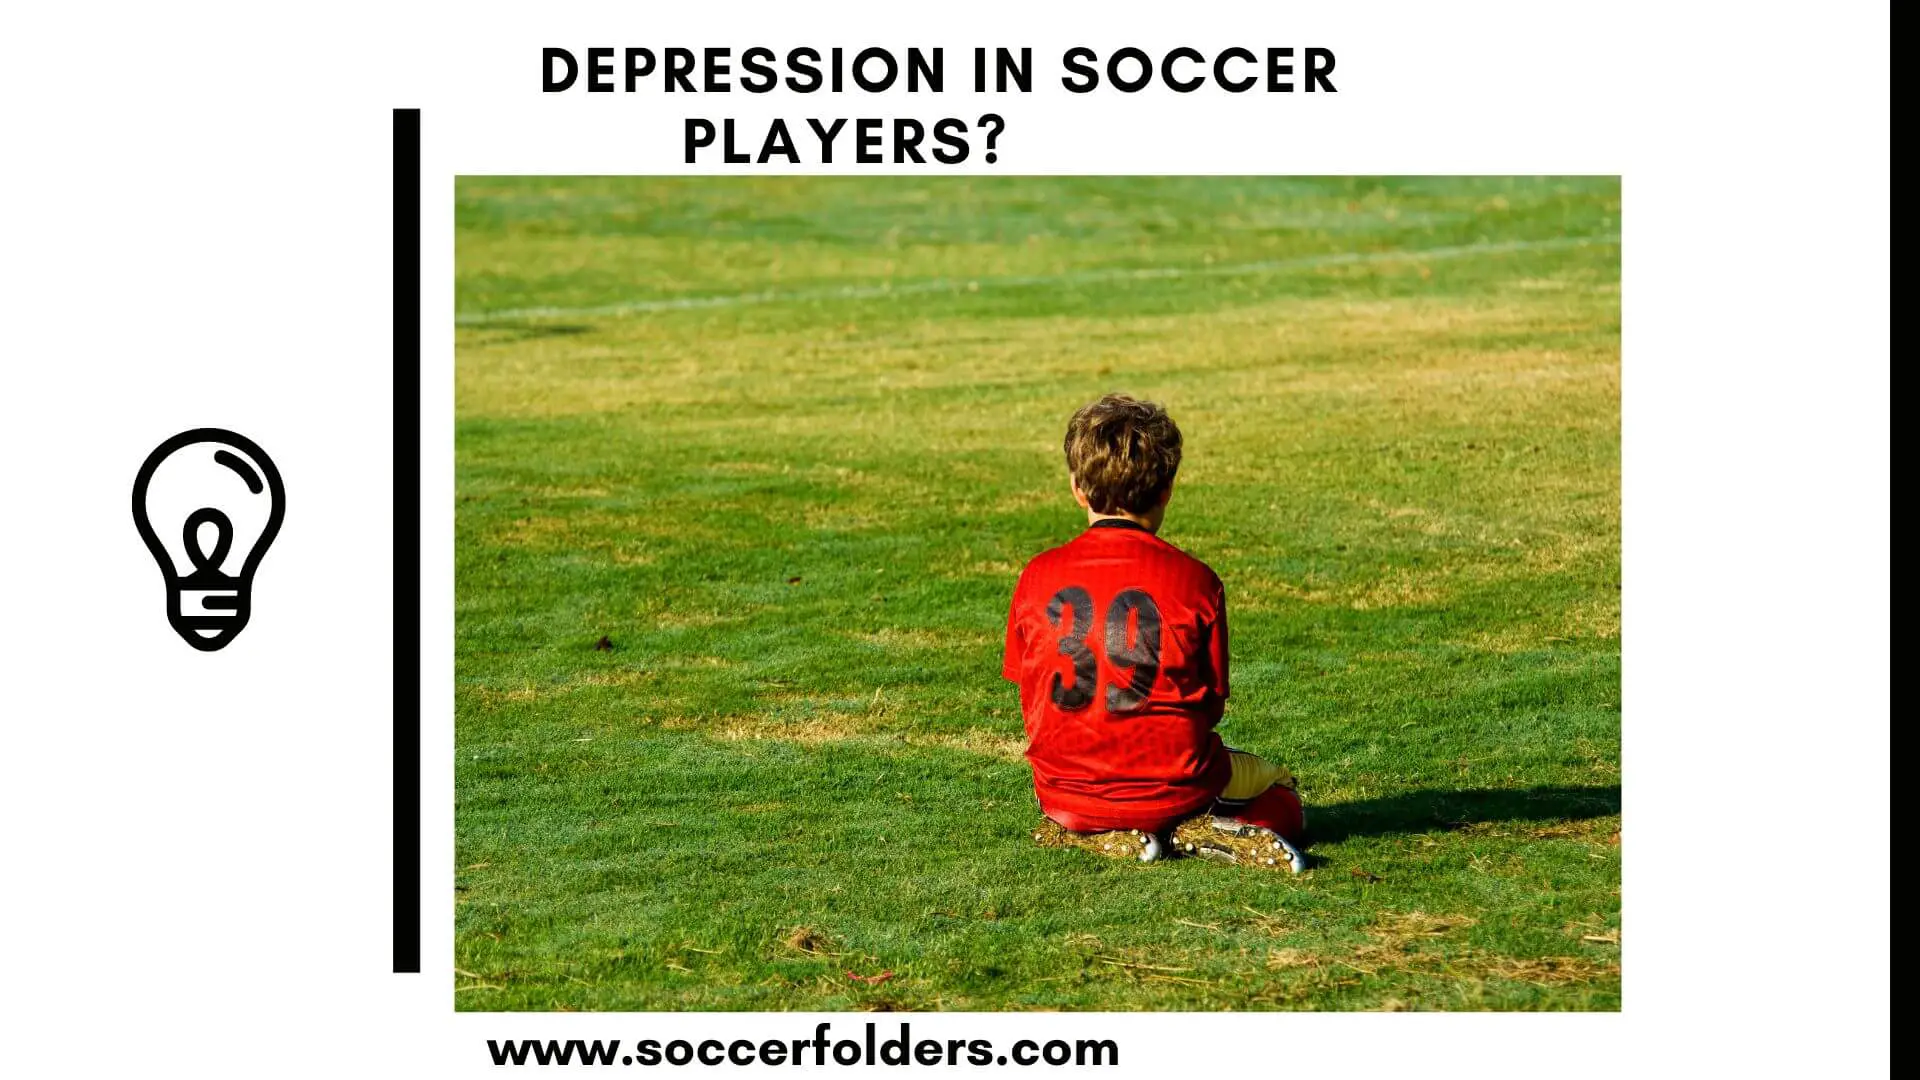 Depression in soccer - Featured image